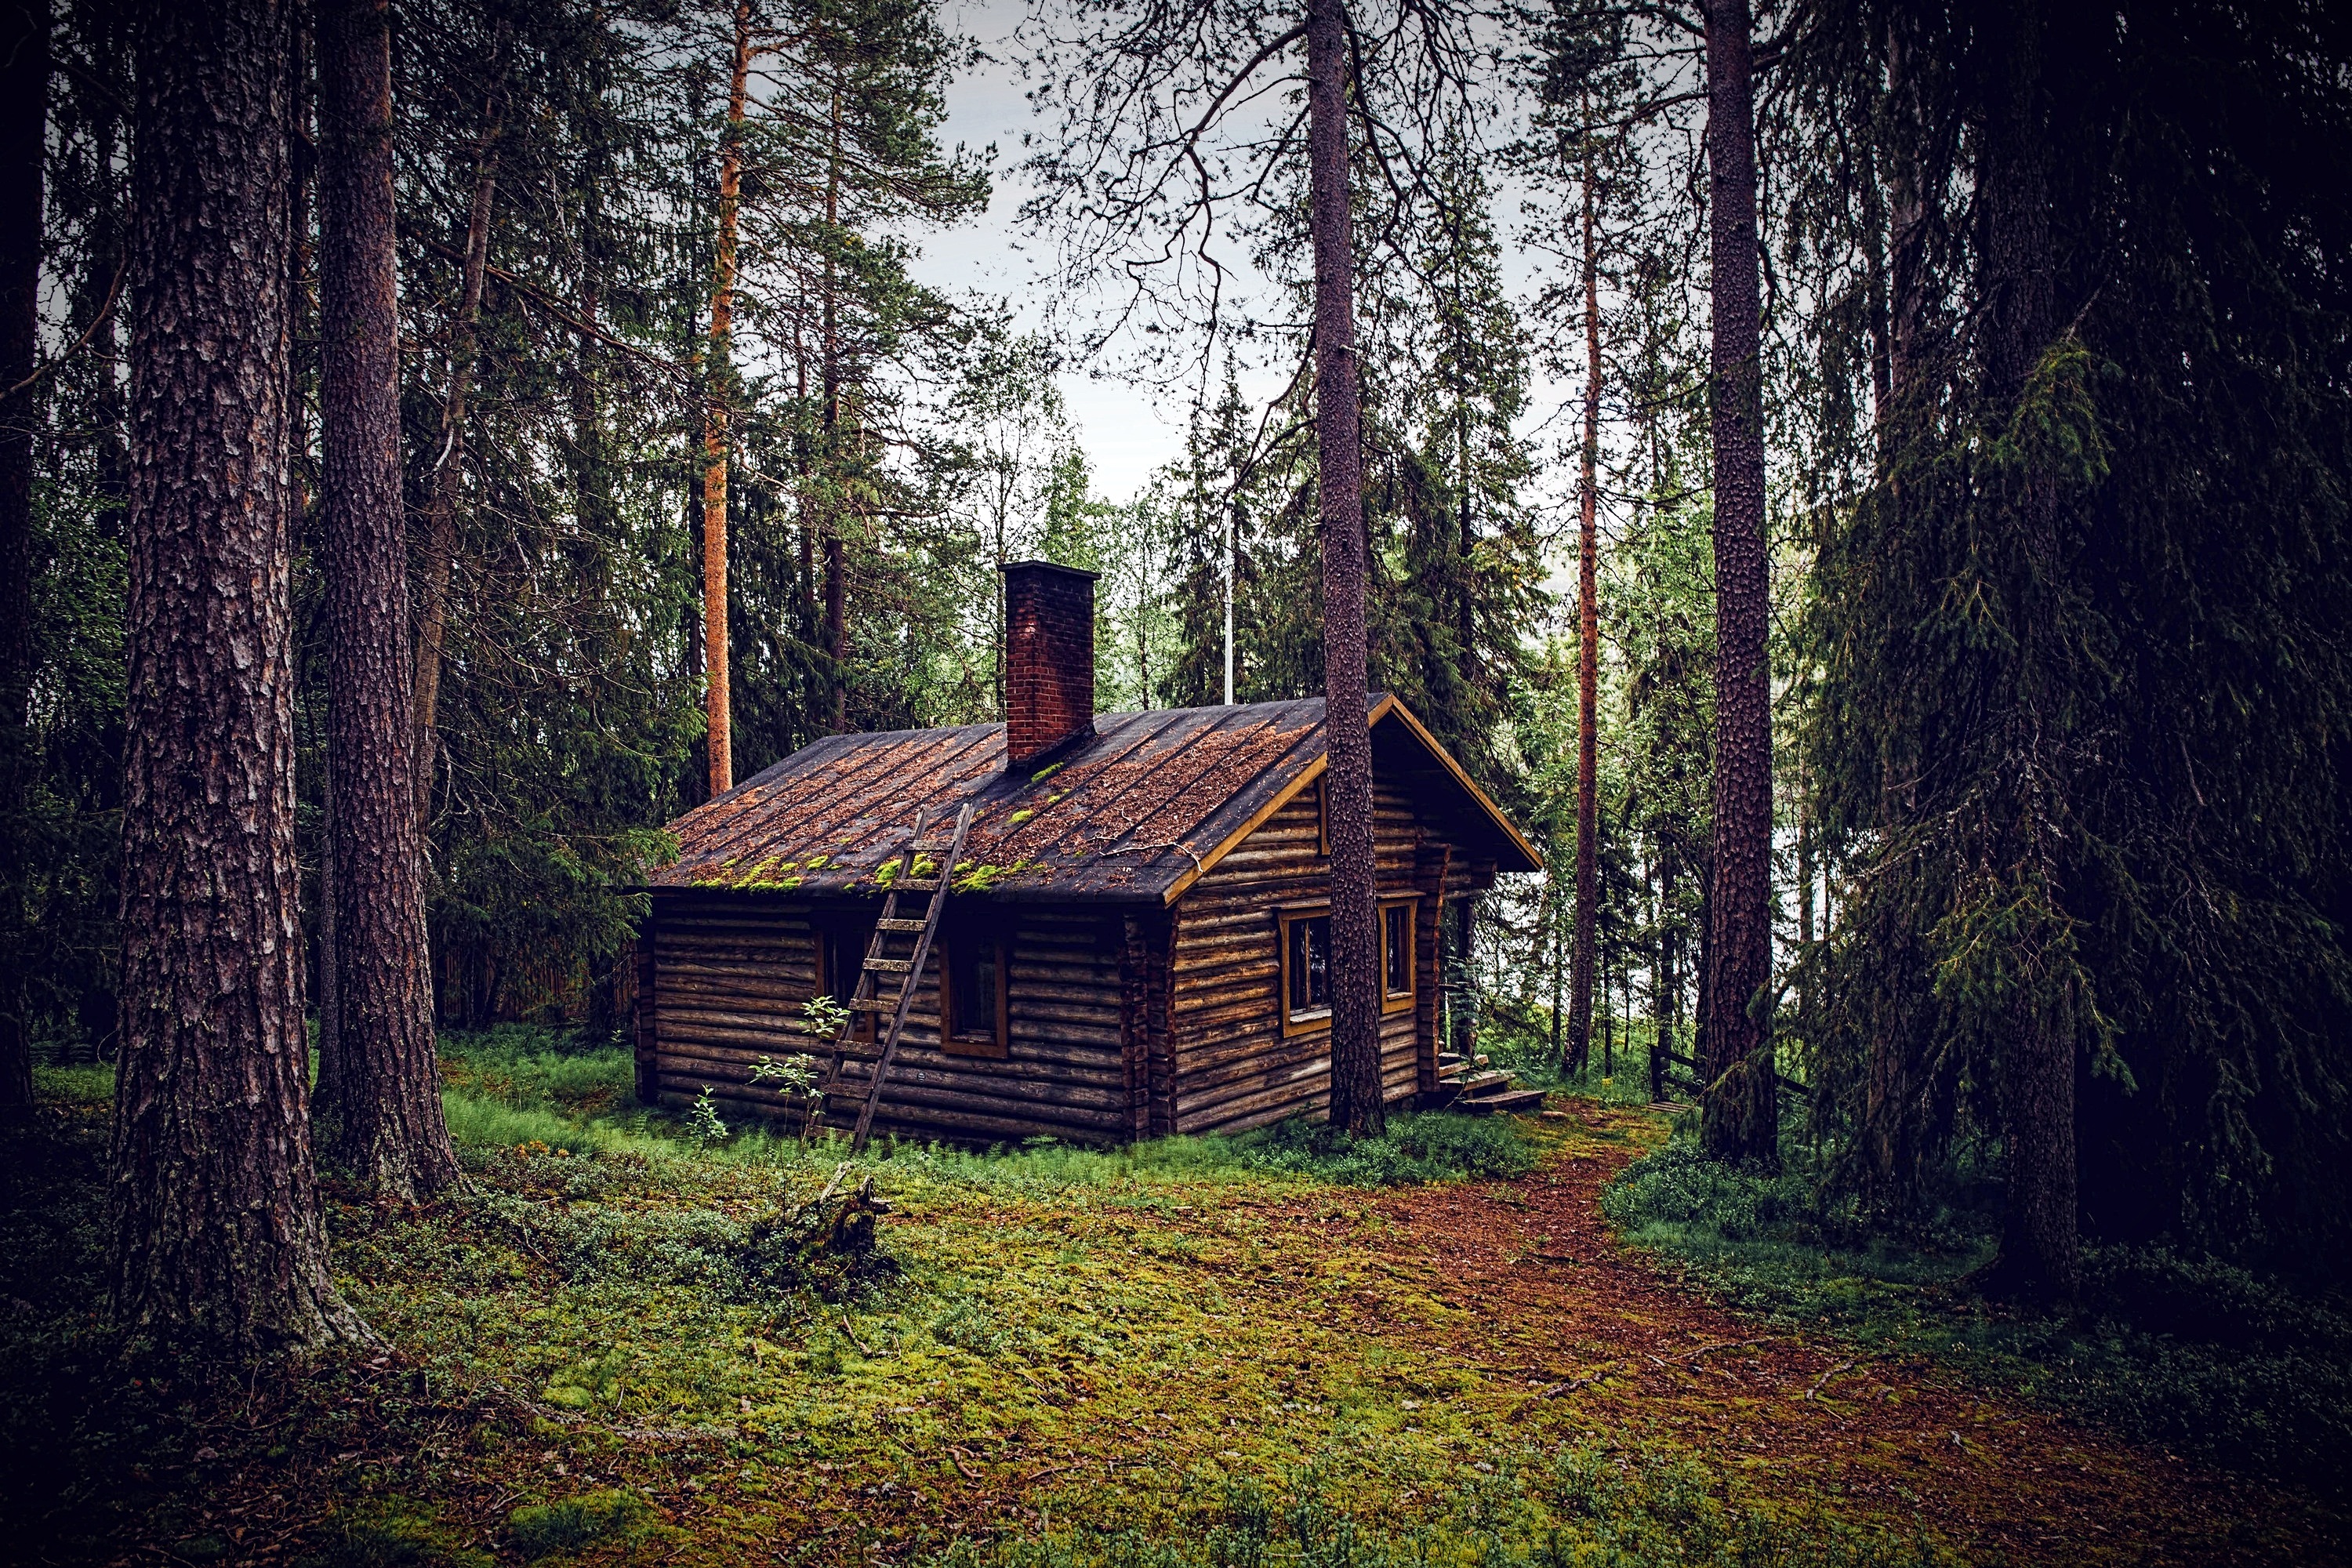 A wooden cabin in the woods